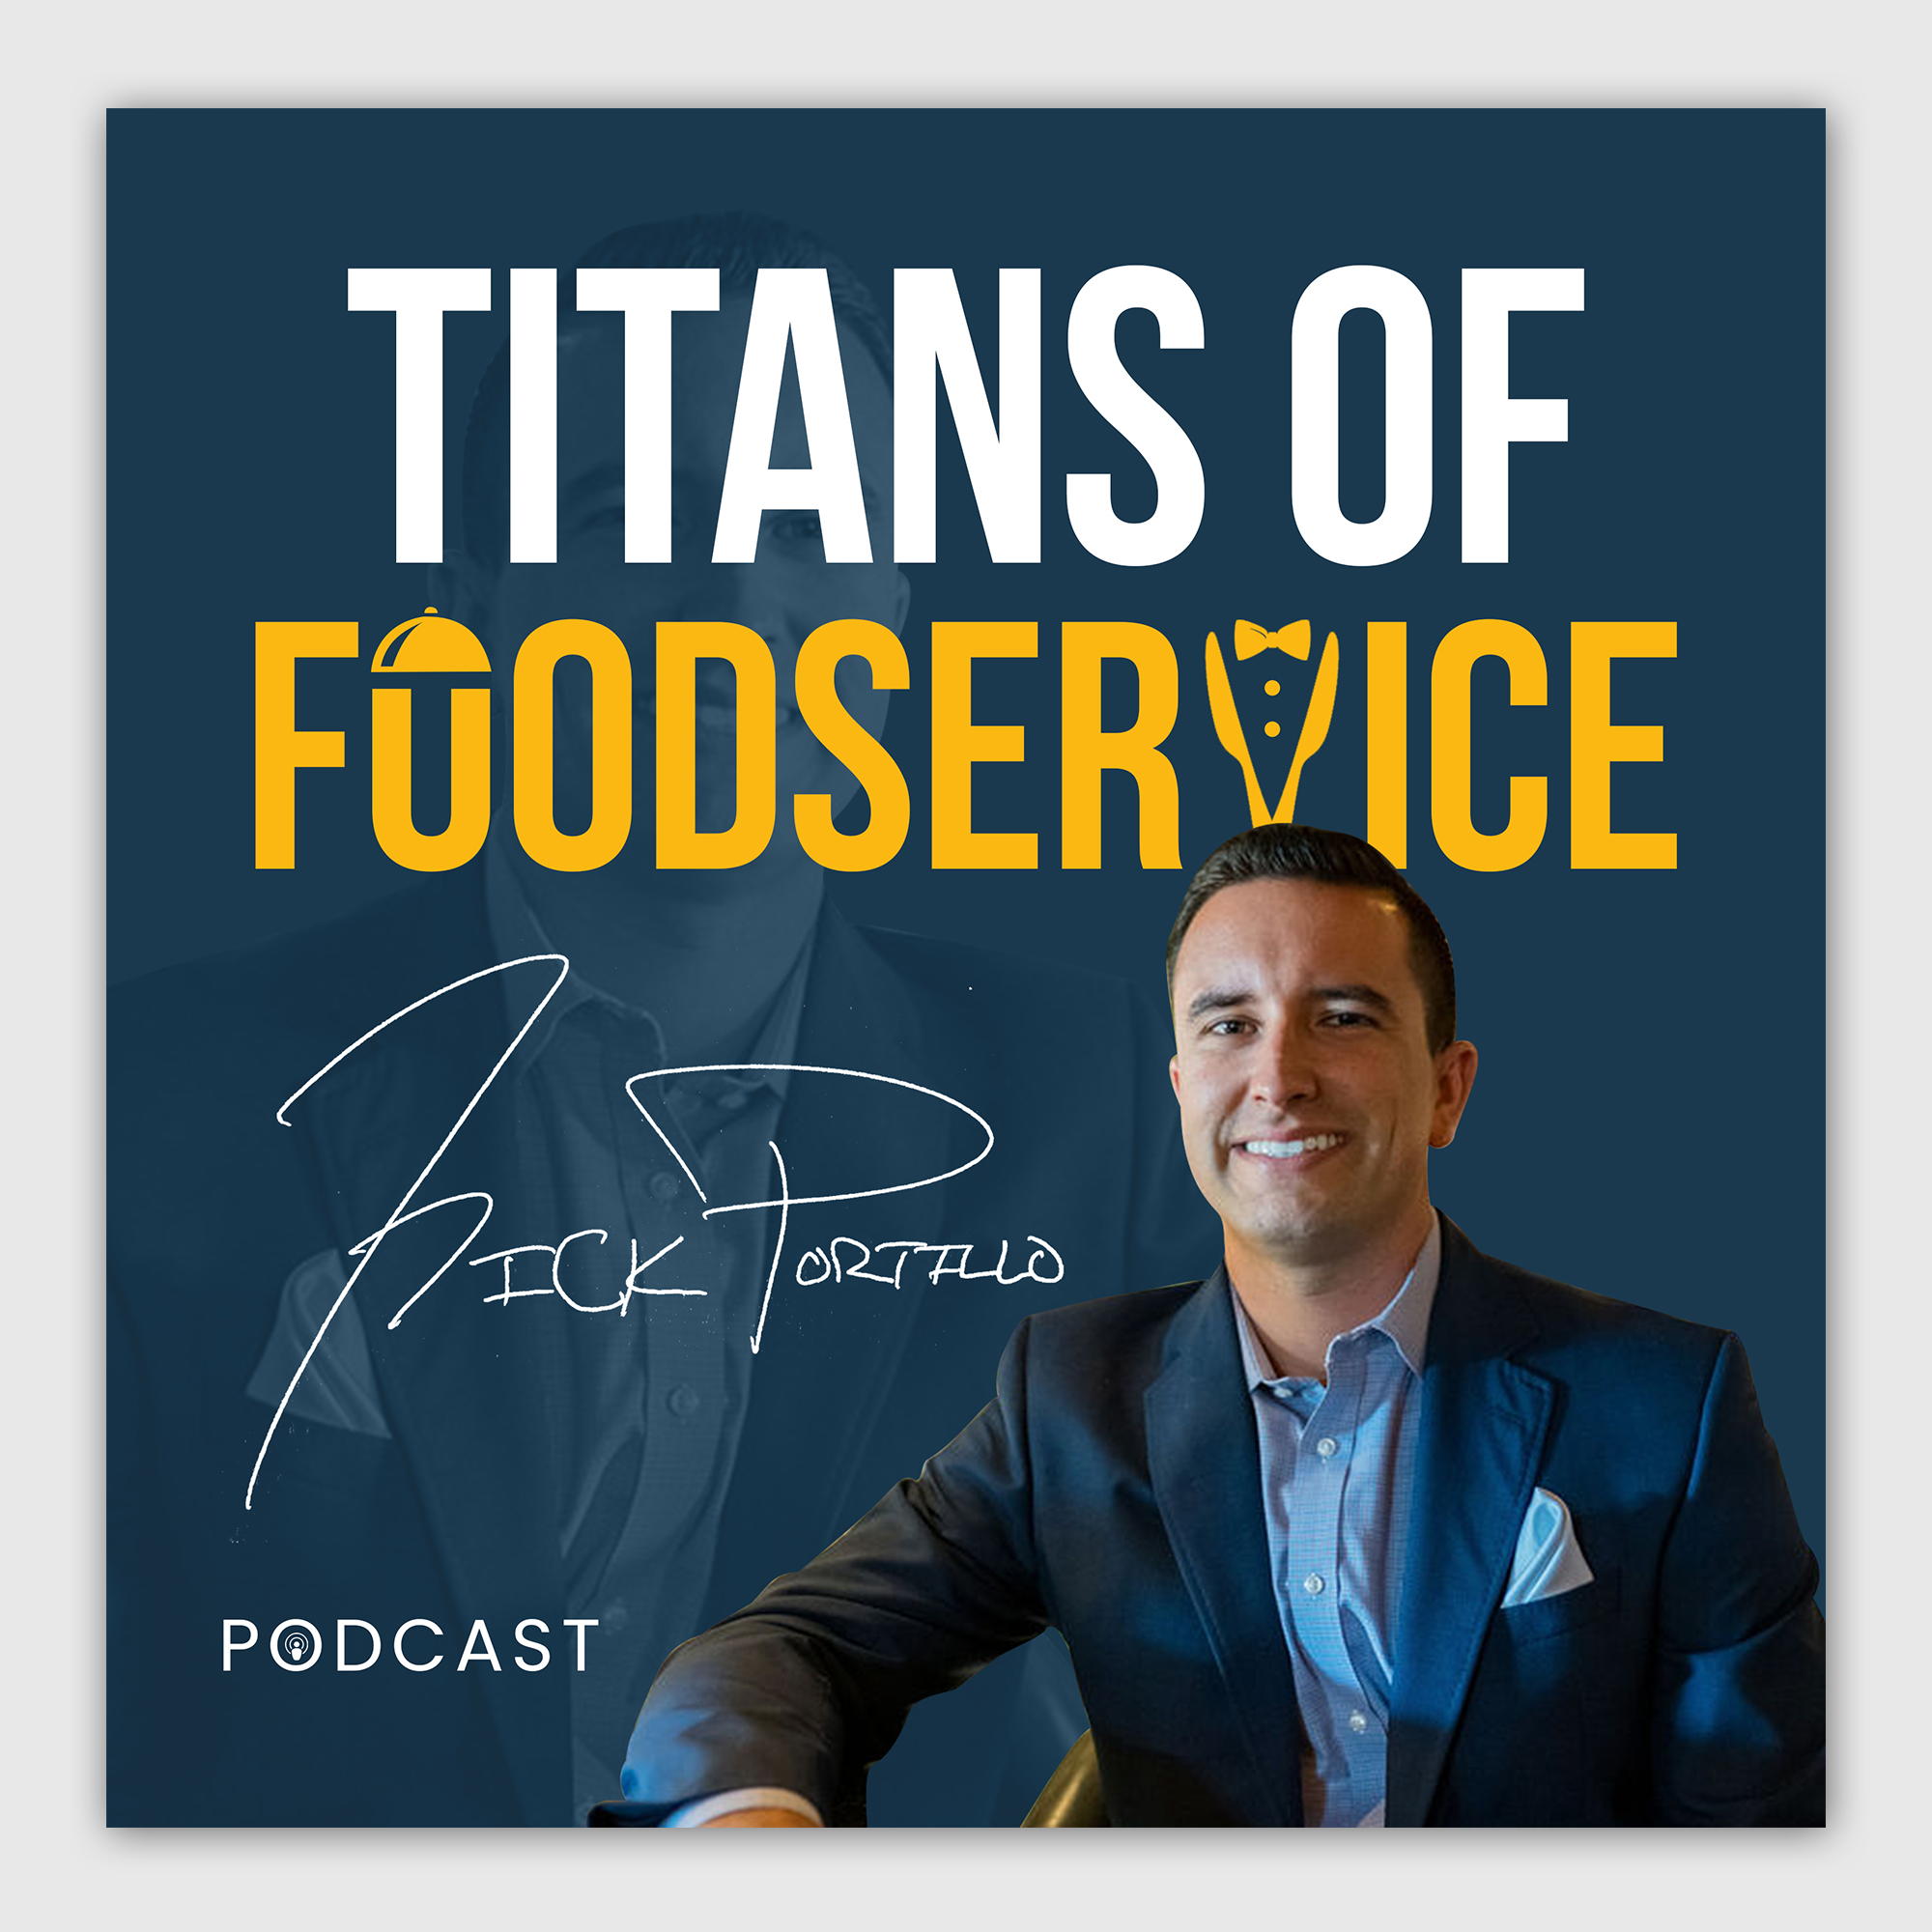 Artwork for Titans of Foodservice